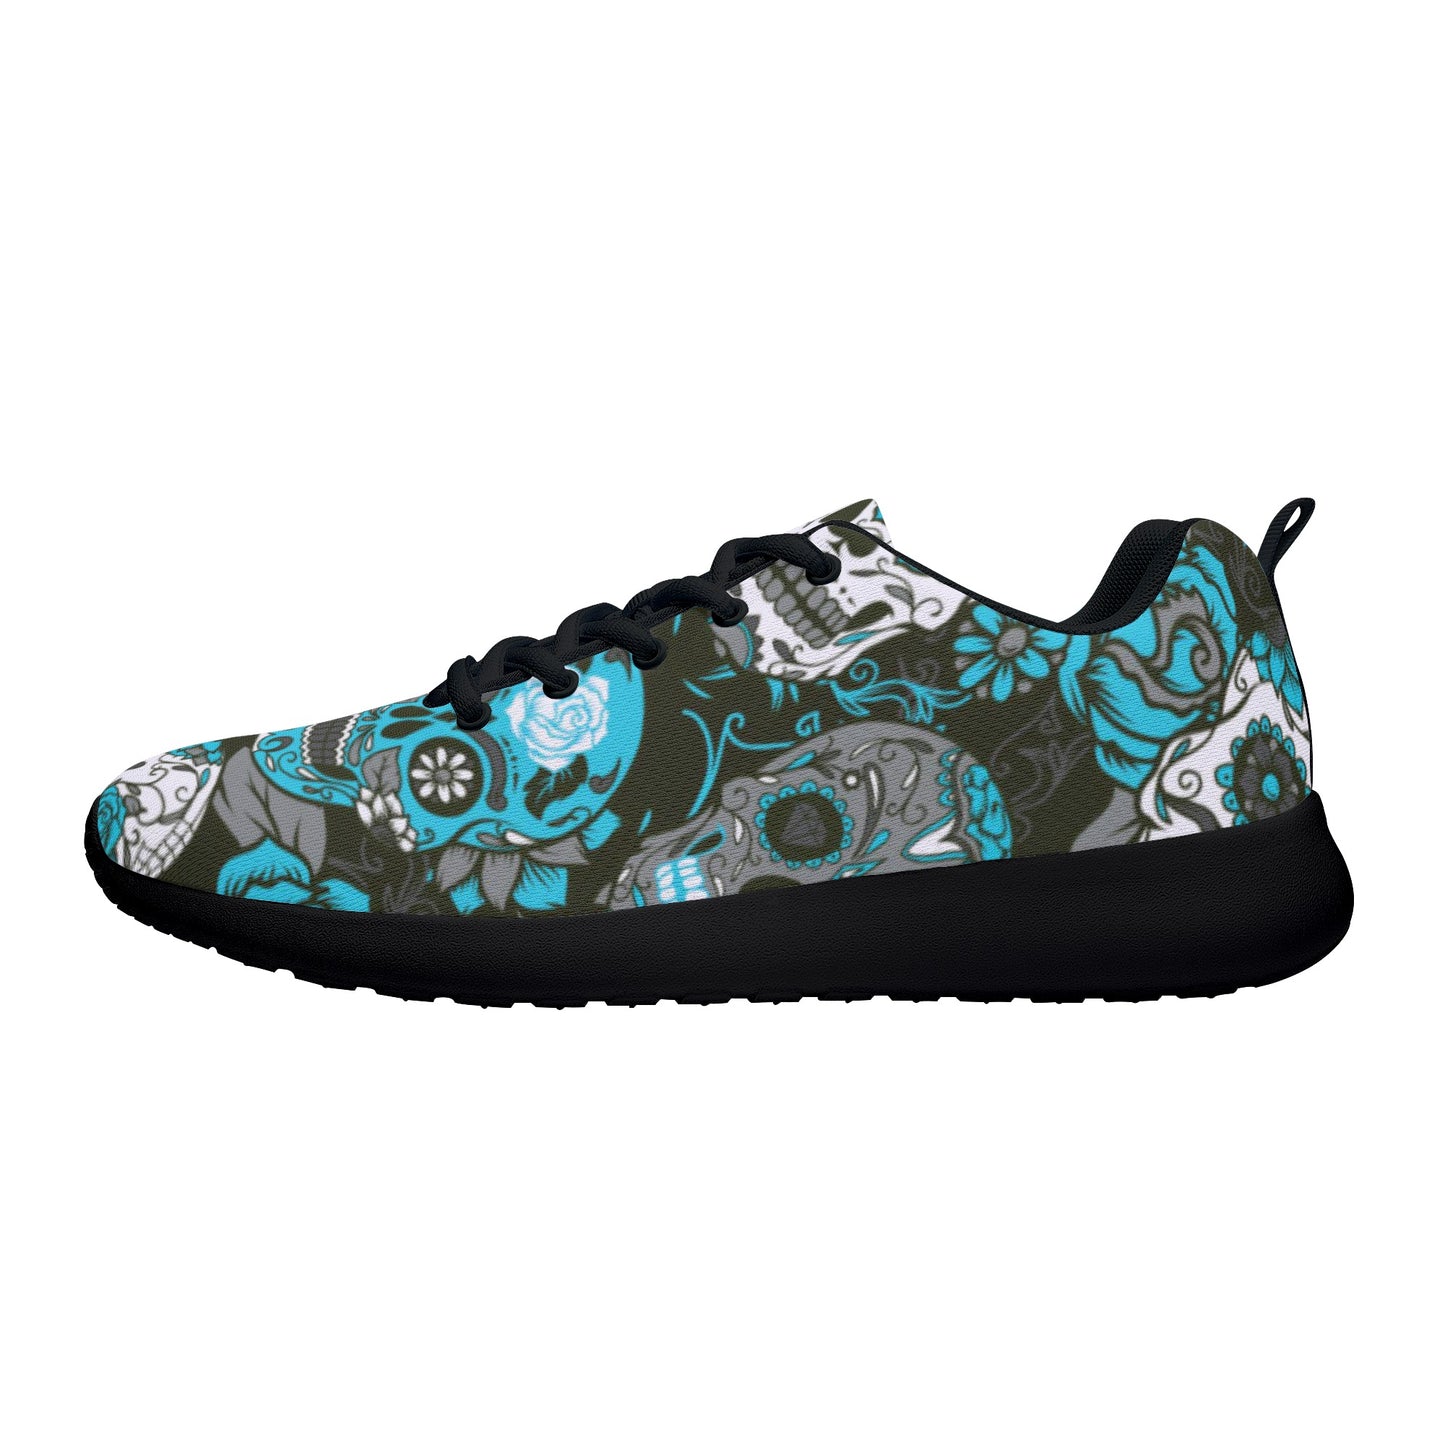 Sugar skull day of the dead Women's Mesh Athletic Sneakers